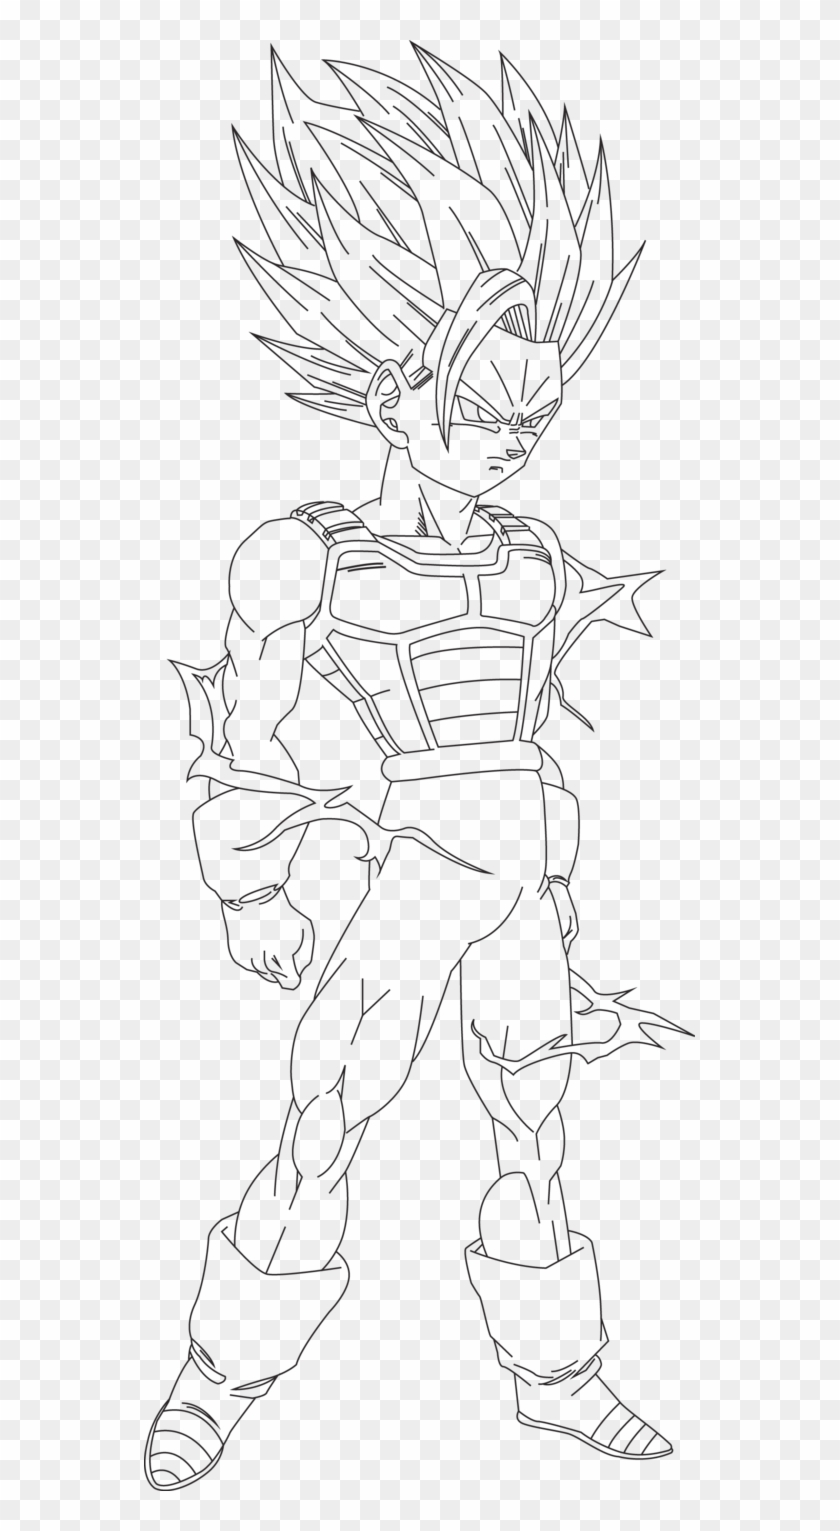 Gohan Ssj20 Coloring Pages Cell Saga By And - Colouring Pages For